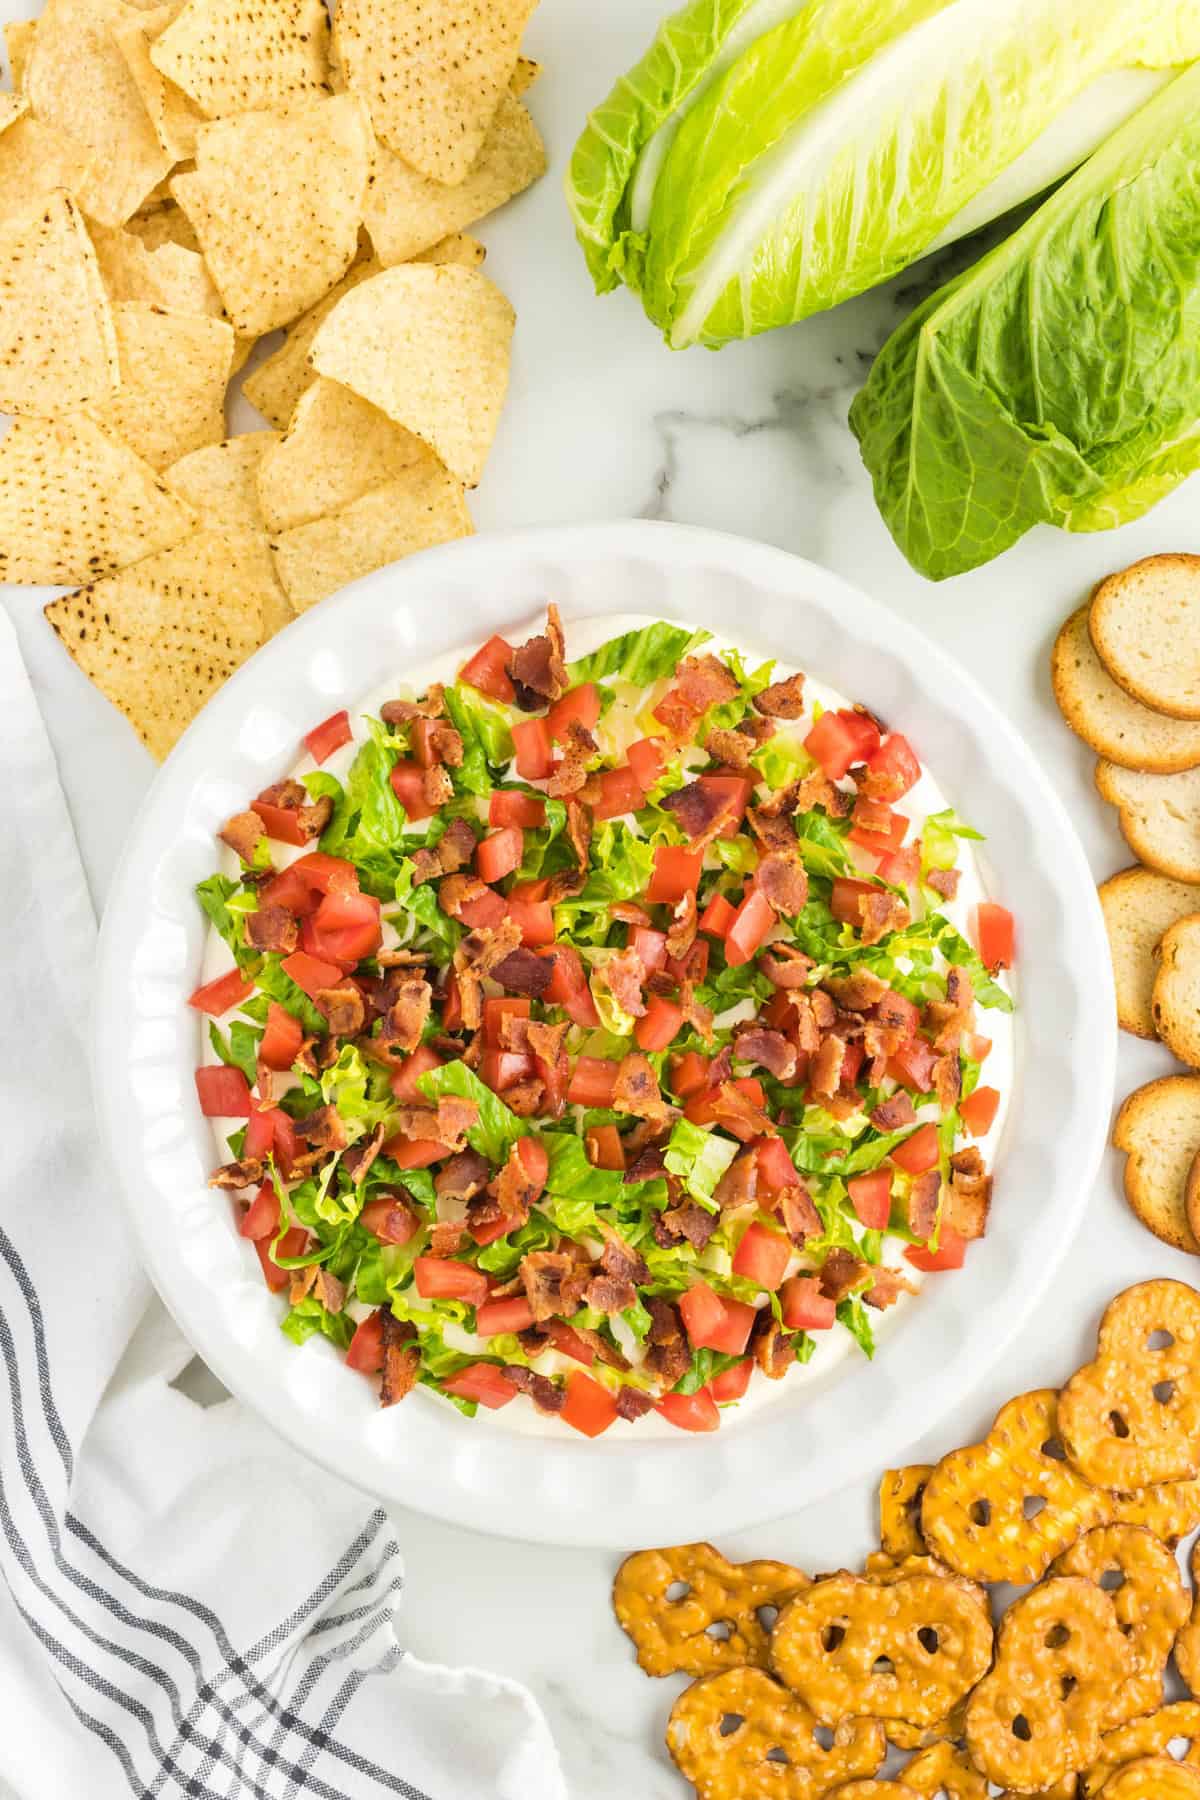 Cold BLT Dip in Shallow Serving Dish with a Variety of Dippers